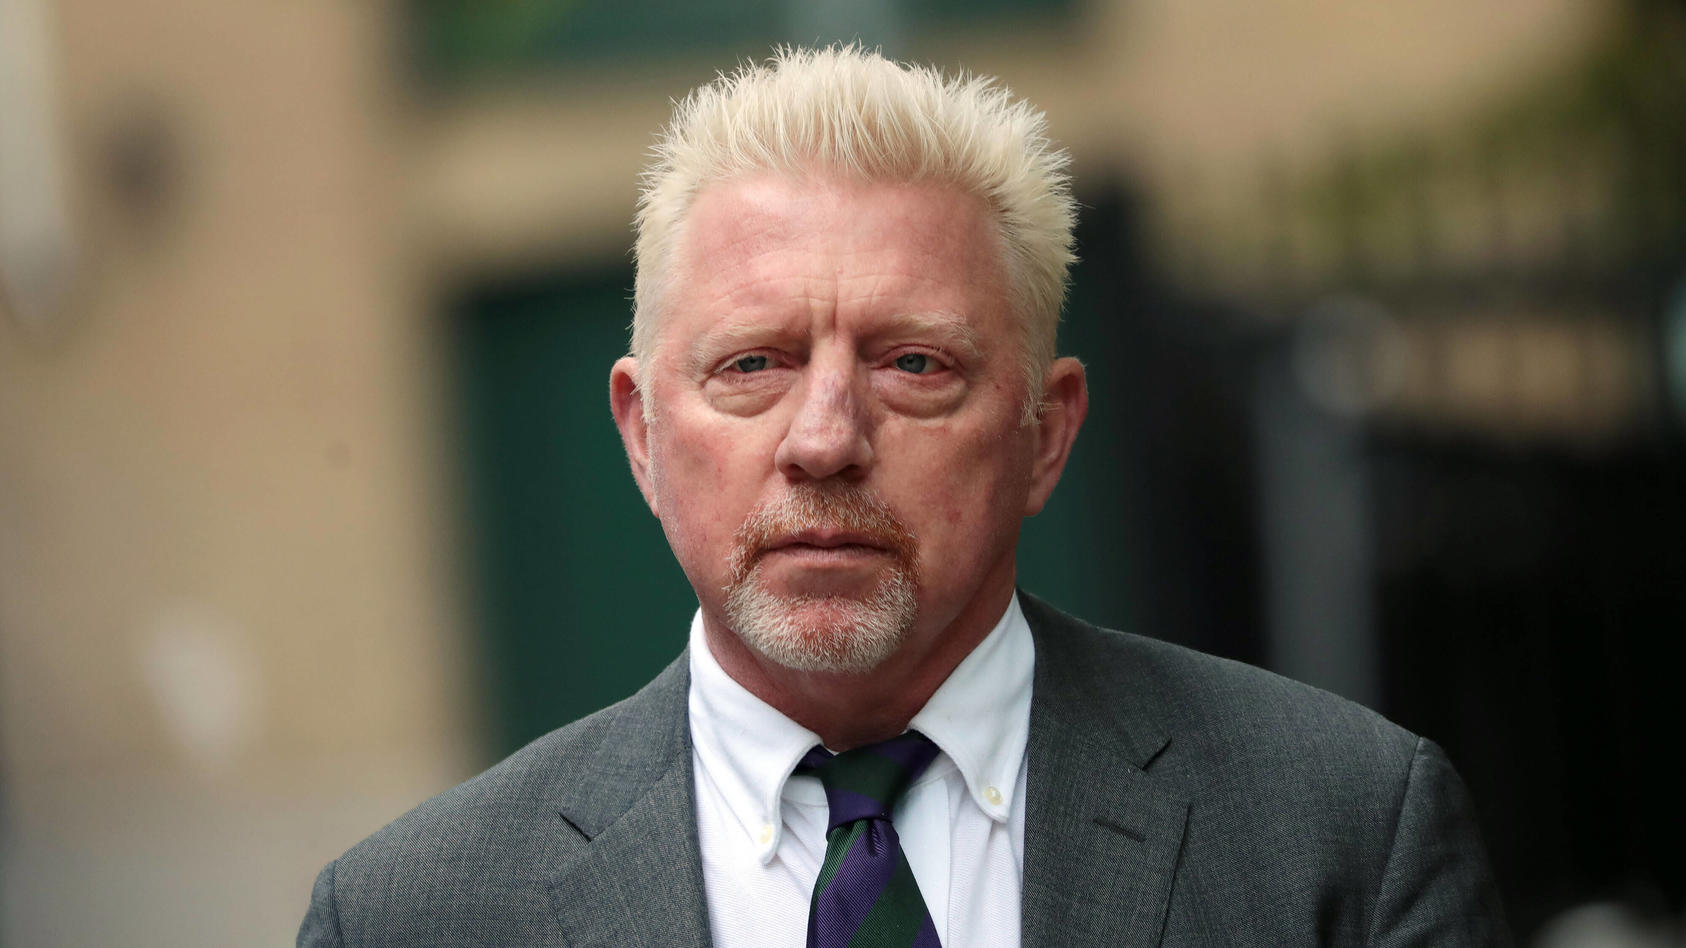 German Boris Becker arrives at Southwark Crown Court escorted by his partner Lilian de Carvalho Monteiro in London on Friday, April 29, 2022.Six time Grand Slam tennis champion is being sentenced today after being found guilty of four charges under t